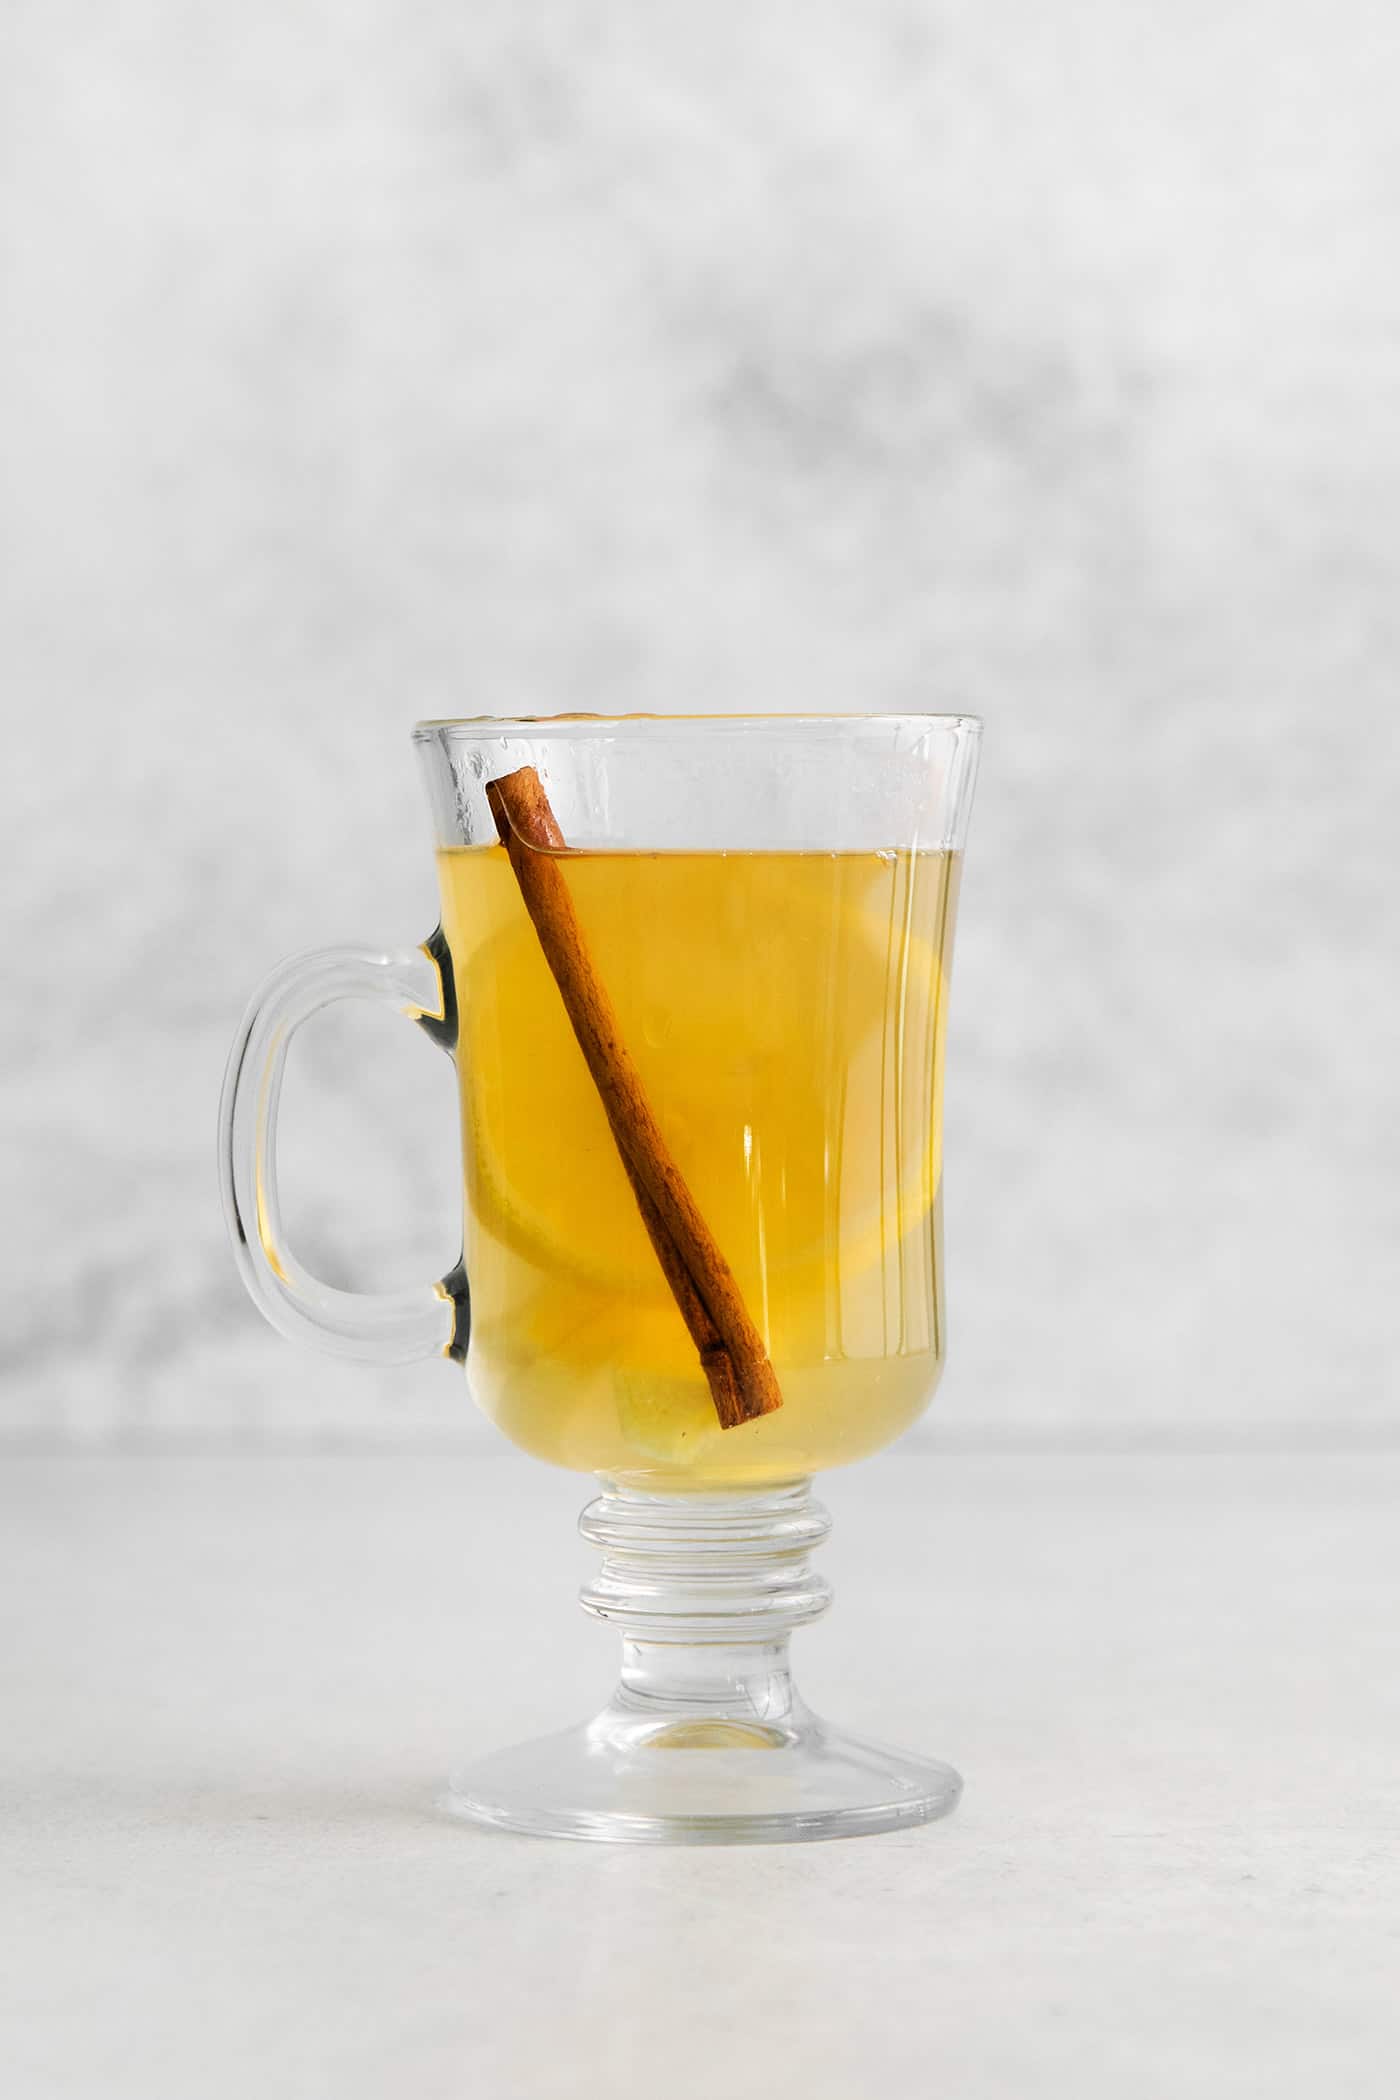 A hot tottie in a glass mug with a cinnamon stick